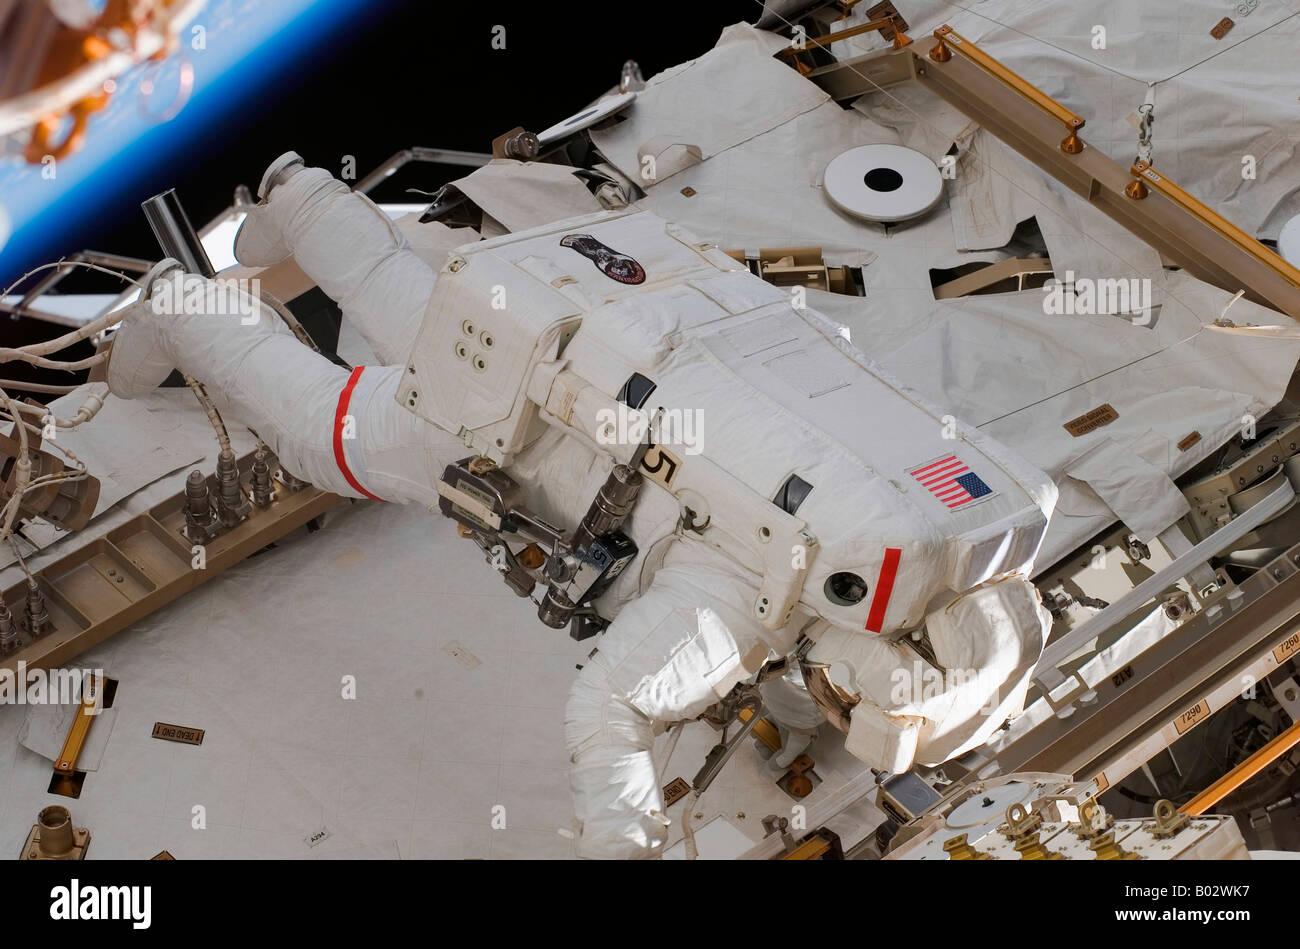 Astronaut partcipating in extravehicular activity. Stock Photo